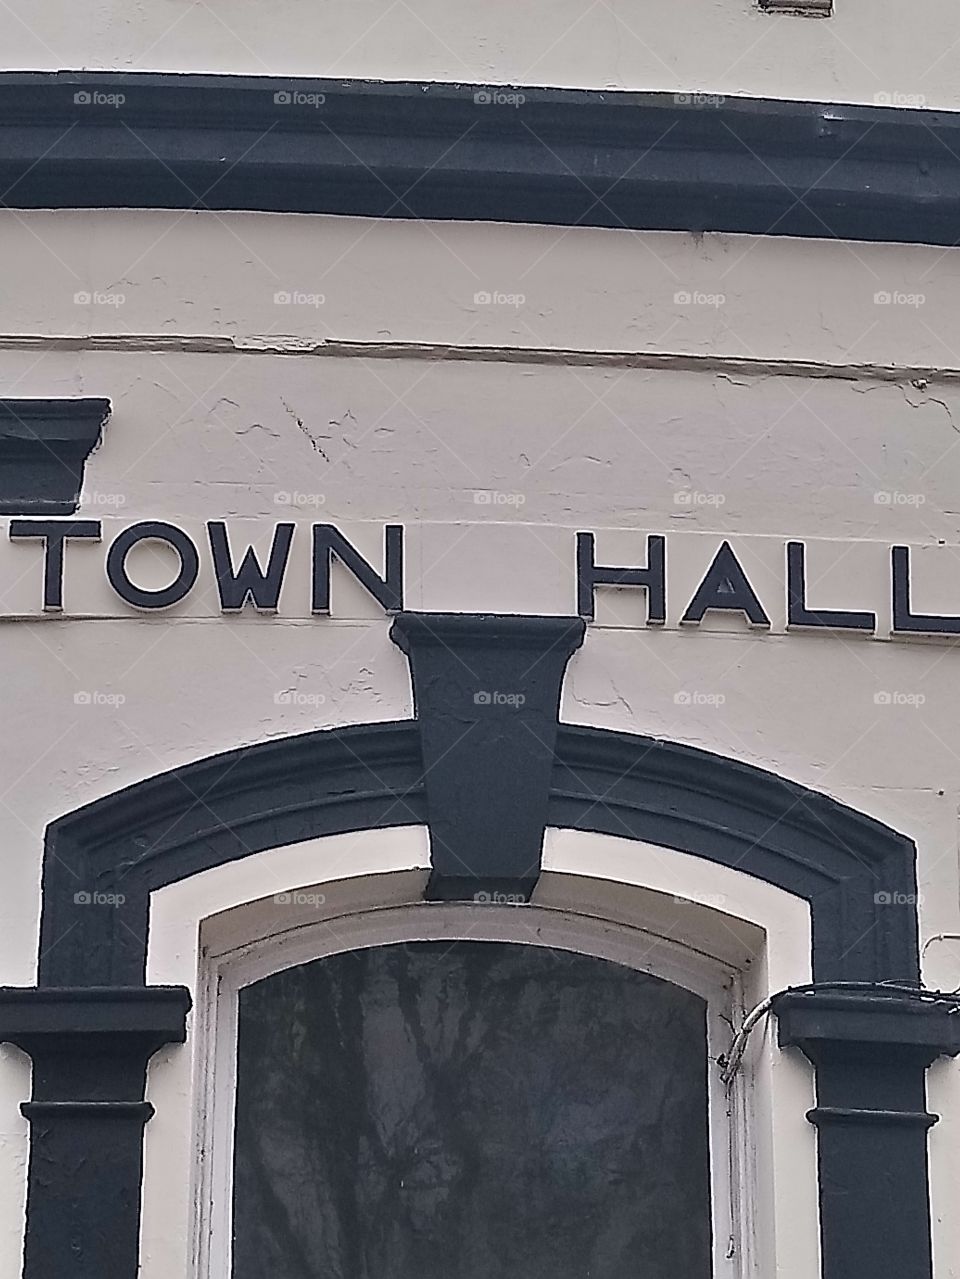 The old town hall signage